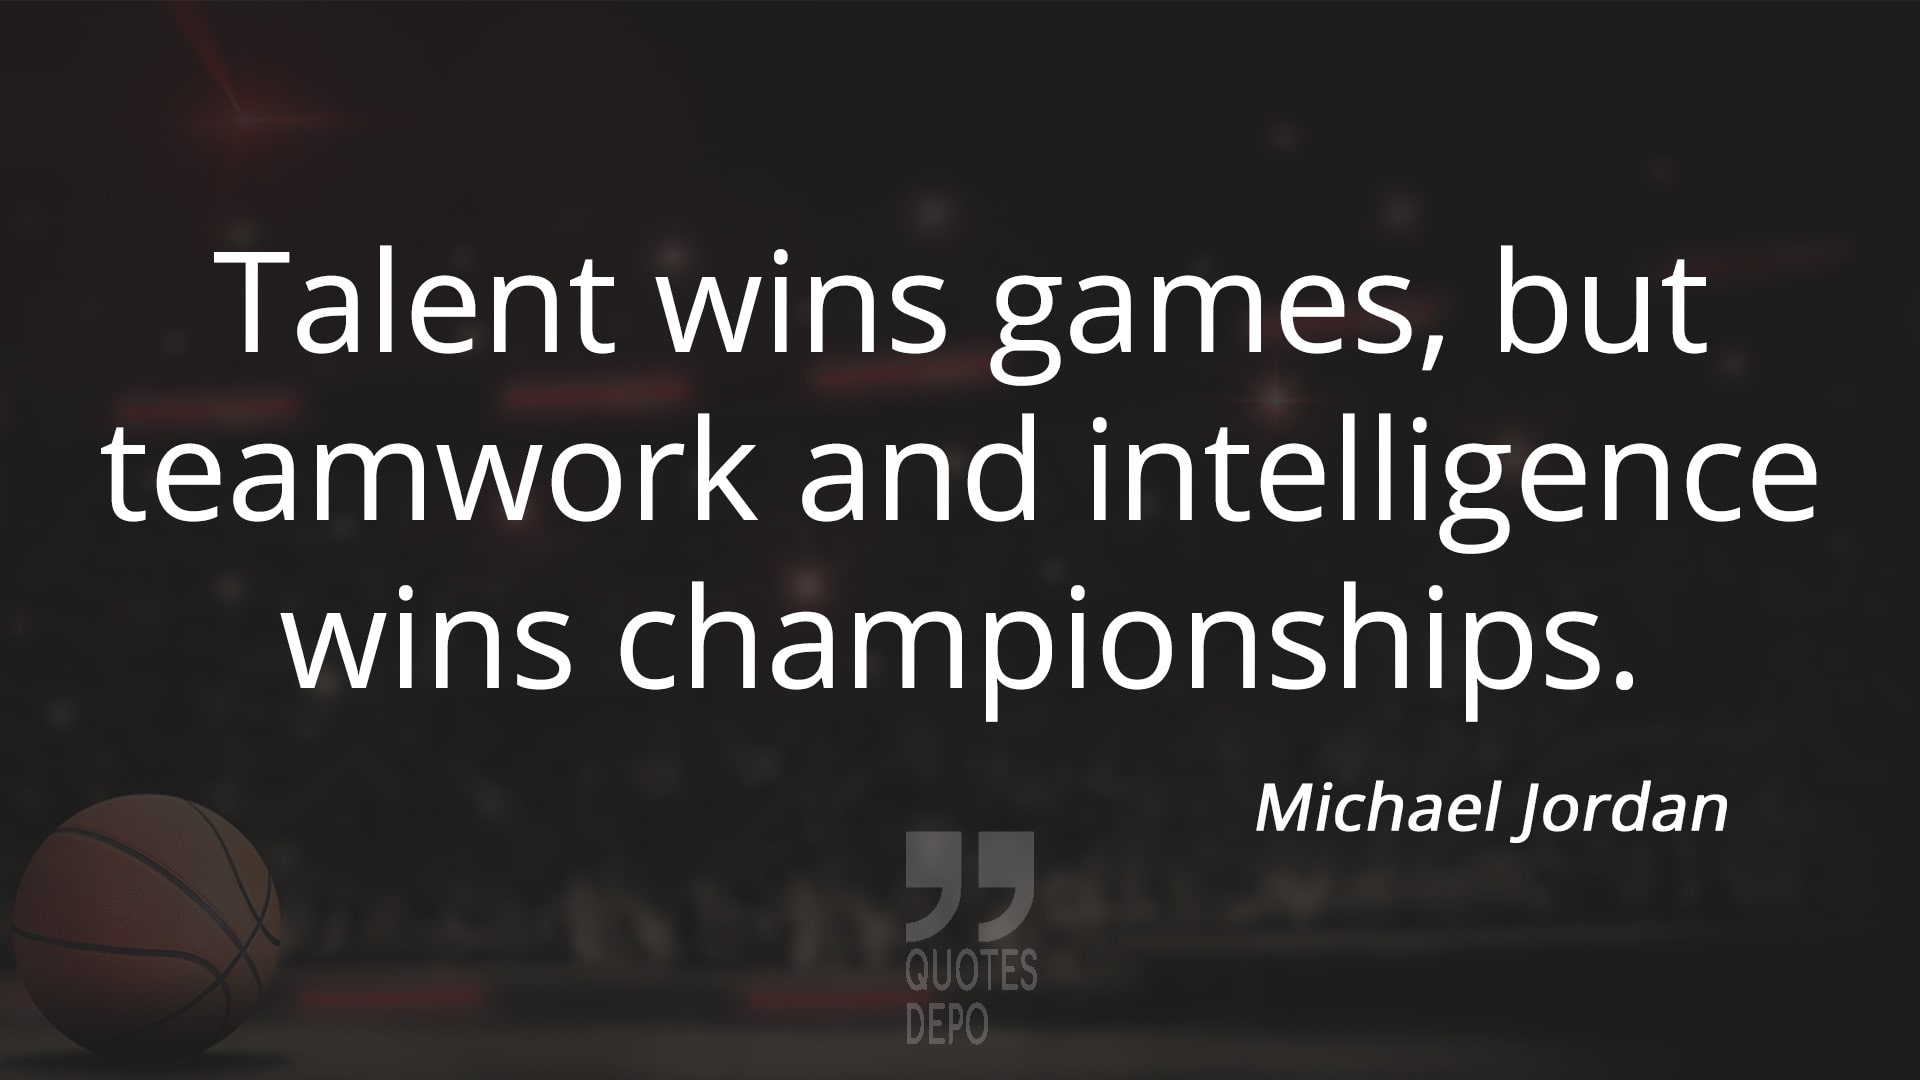 talent wins games but teamwork and intelligence wins championships - michael jordan quotes